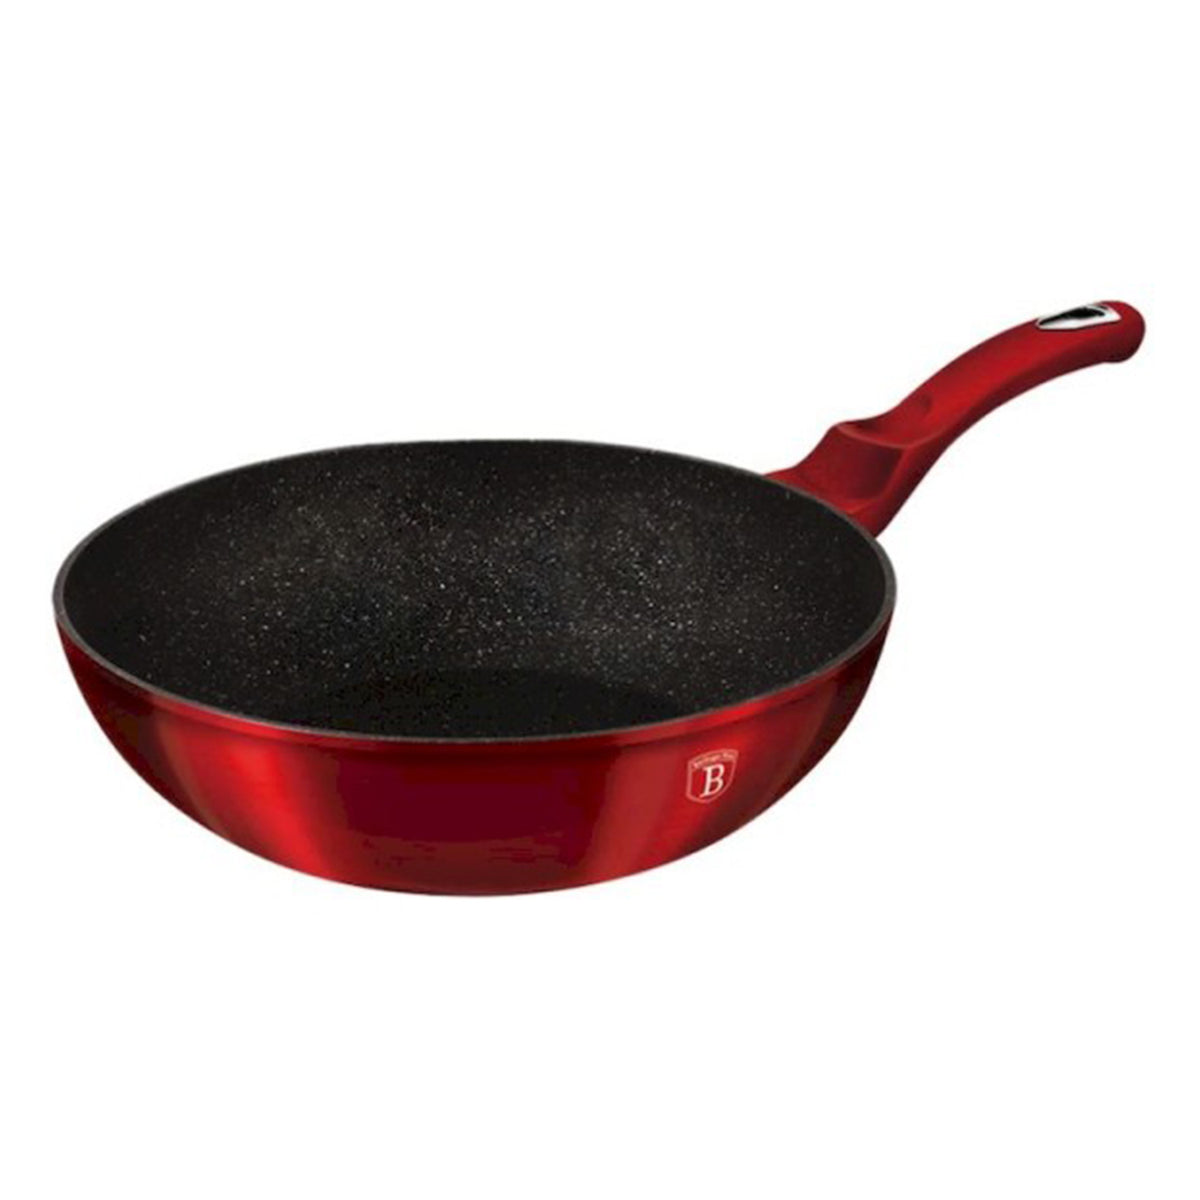 Wok Frypan With Handle - Burgundy Color